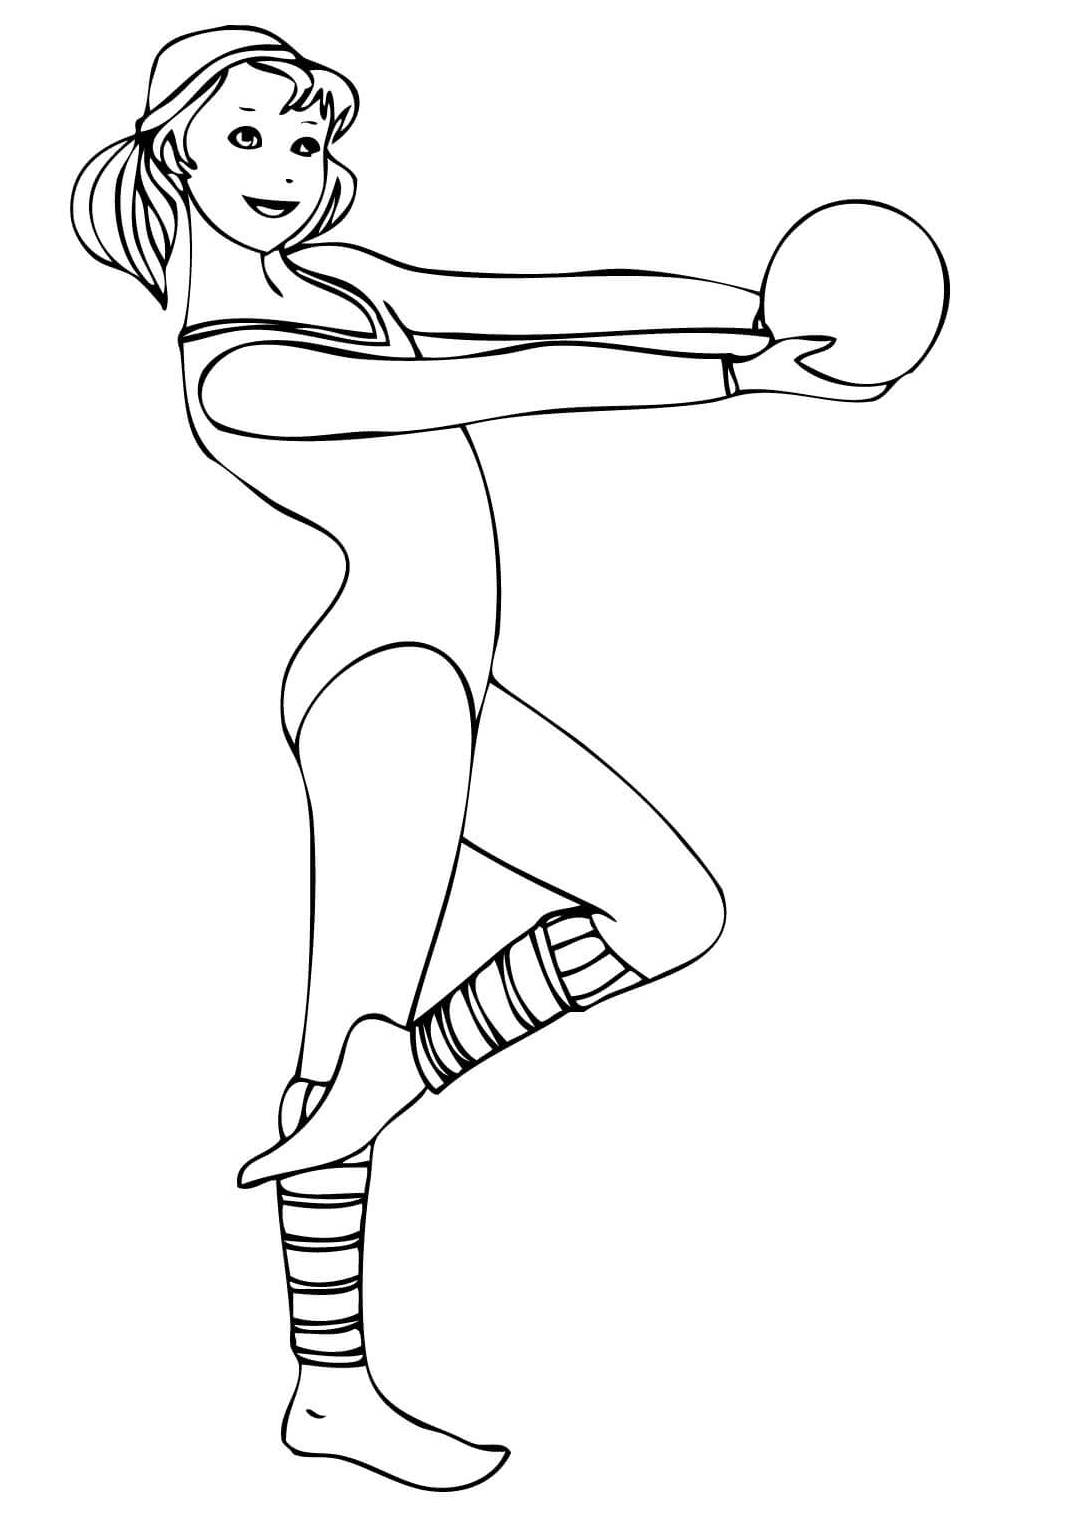 Rhythmic Gymnastics Exercises with Ball Coloring Page